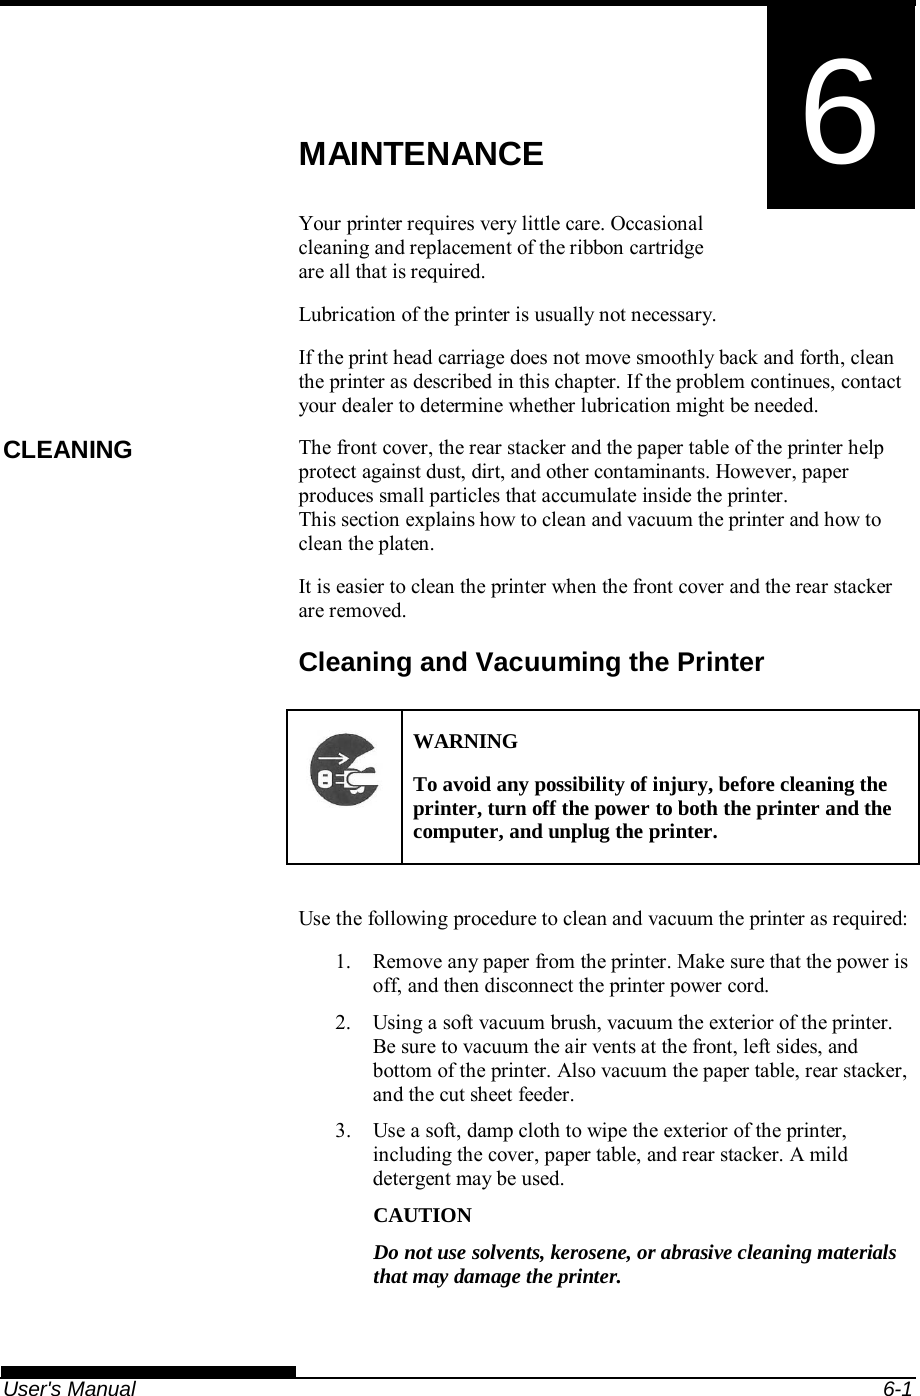   User&apos;s Manual  6-1 6  CHAPTER 6  MAINTENANCE MAINTENANCE Your printer requires very little care. Occasional cleaning and replacement of the ribbon cartridge are all that is required. Lubrication of the printer is usually not necessary. If the print head carriage does not move smoothly back and forth, clean the printer as described in this chapter. If the problem continues, contact your dealer to determine whether lubrication might be needed. The front cover, the rear stacker and the paper table of the printer help protect against dust, dirt, and other contaminants. However, paper produces small particles that accumulate inside the printer. This section explains how to clean and vacuum the printer and how to clean the platen. It is easier to clean the printer when the front cover and the rear stacker are removed. Cleaning and Vacuuming the Printer  WARNING To avoid any possibility of injury, before cleaning the printer, turn off the power to both the printer and the computer, and unplug the printer.  Use the following procedure to clean and vacuum the printer as required: 1.  Remove any paper from the printer. Make sure that the power is off, and then disconnect the printer power cord. 2.  Using a soft vacuum brush, vacuum the exterior of the printer. Be sure to vacuum the air vents at the front, left sides, and bottom of the printer. Also vacuum the paper table, rear stacker, and the cut sheet feeder. 3.  Use a soft, damp cloth to wipe the exterior of the printer, including the cover, paper table, and rear stacker. A mild detergent may be used. CAUTION Do not use solvents, kerosene, or abrasive cleaning materials that may damage the printer. CLEANING 